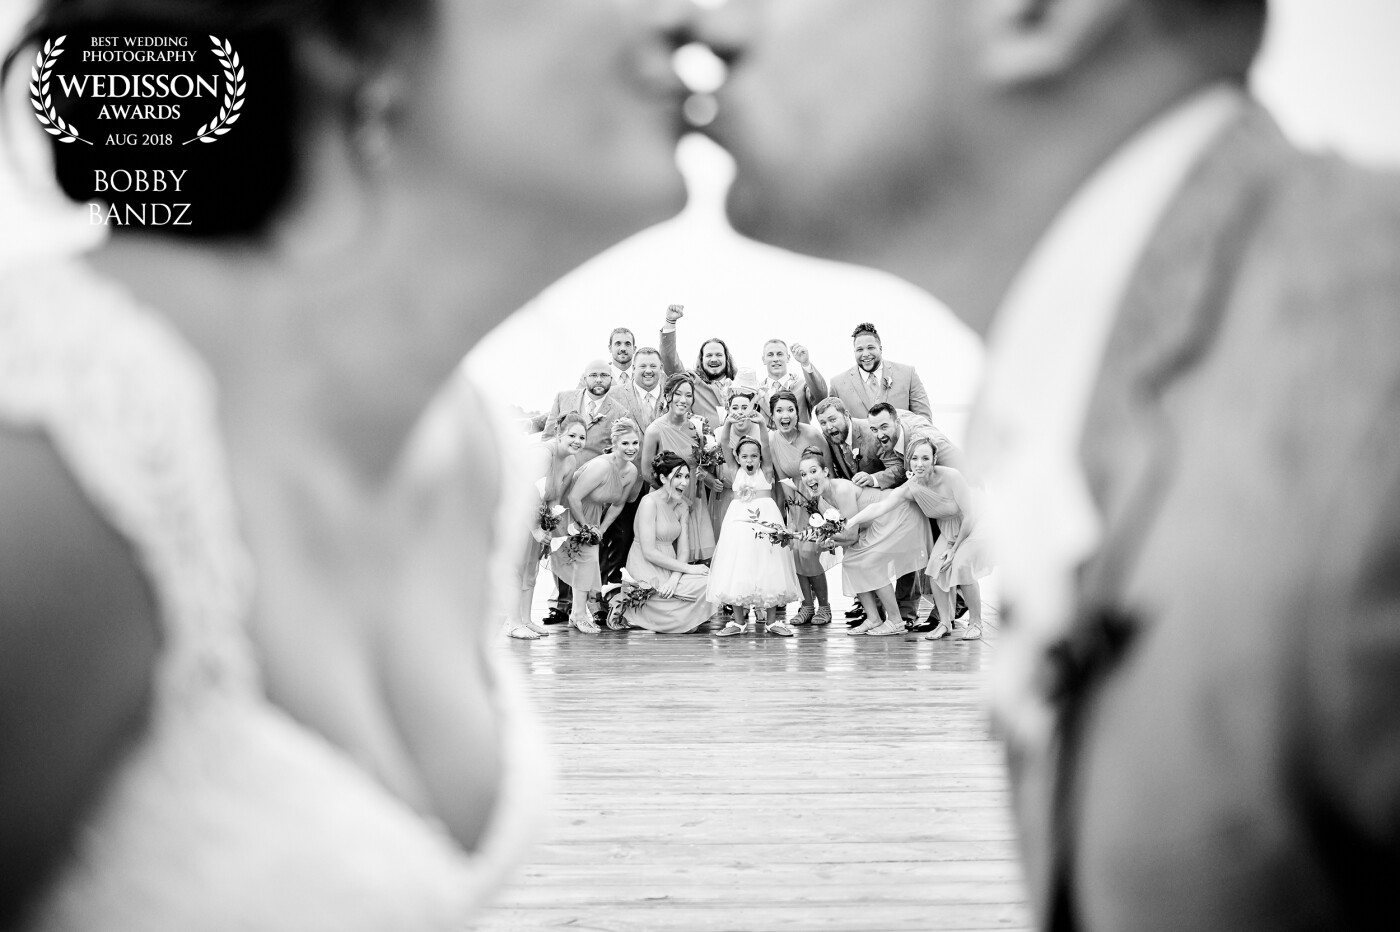 With a huge group we couldn't help but get their reaction after they finally sealed the deal at the alter and got their first kiss as a newlywed! Their daughter made this picture! I love how hype she is! 